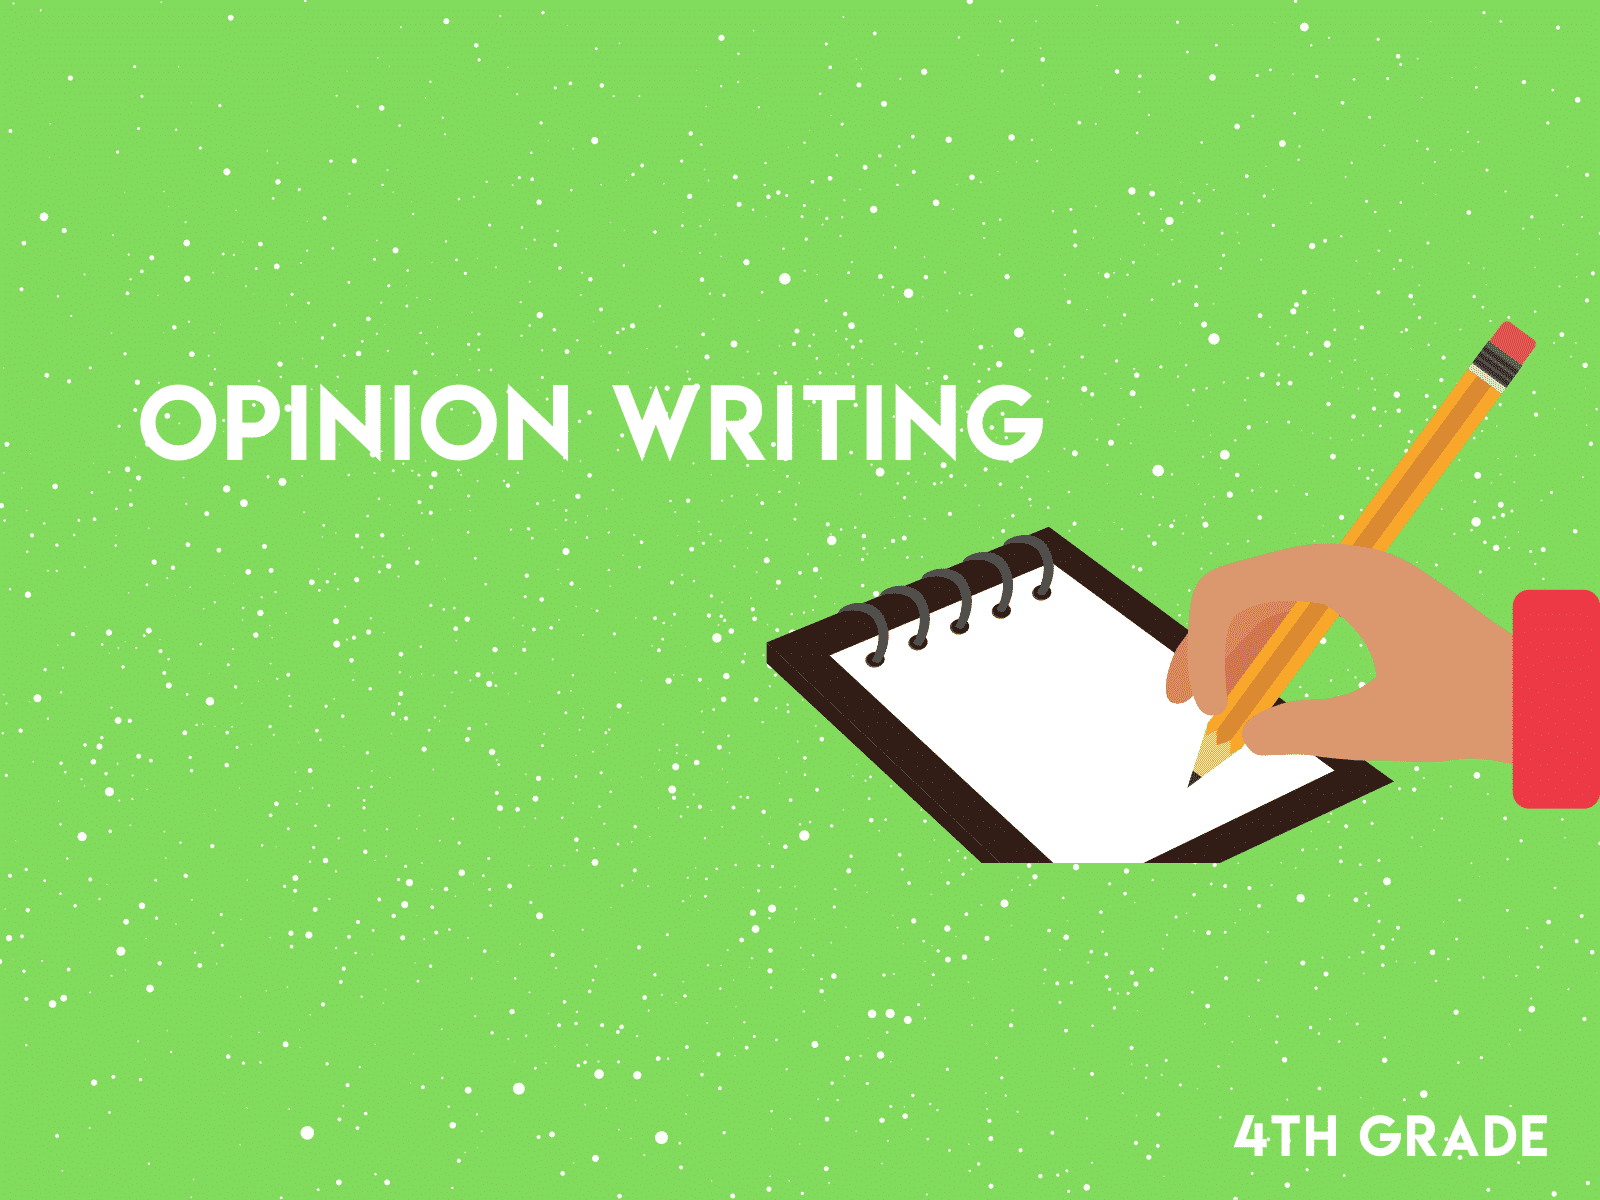 Free packet to guide you through the process of opinion writing | Fourth grade learning workbook